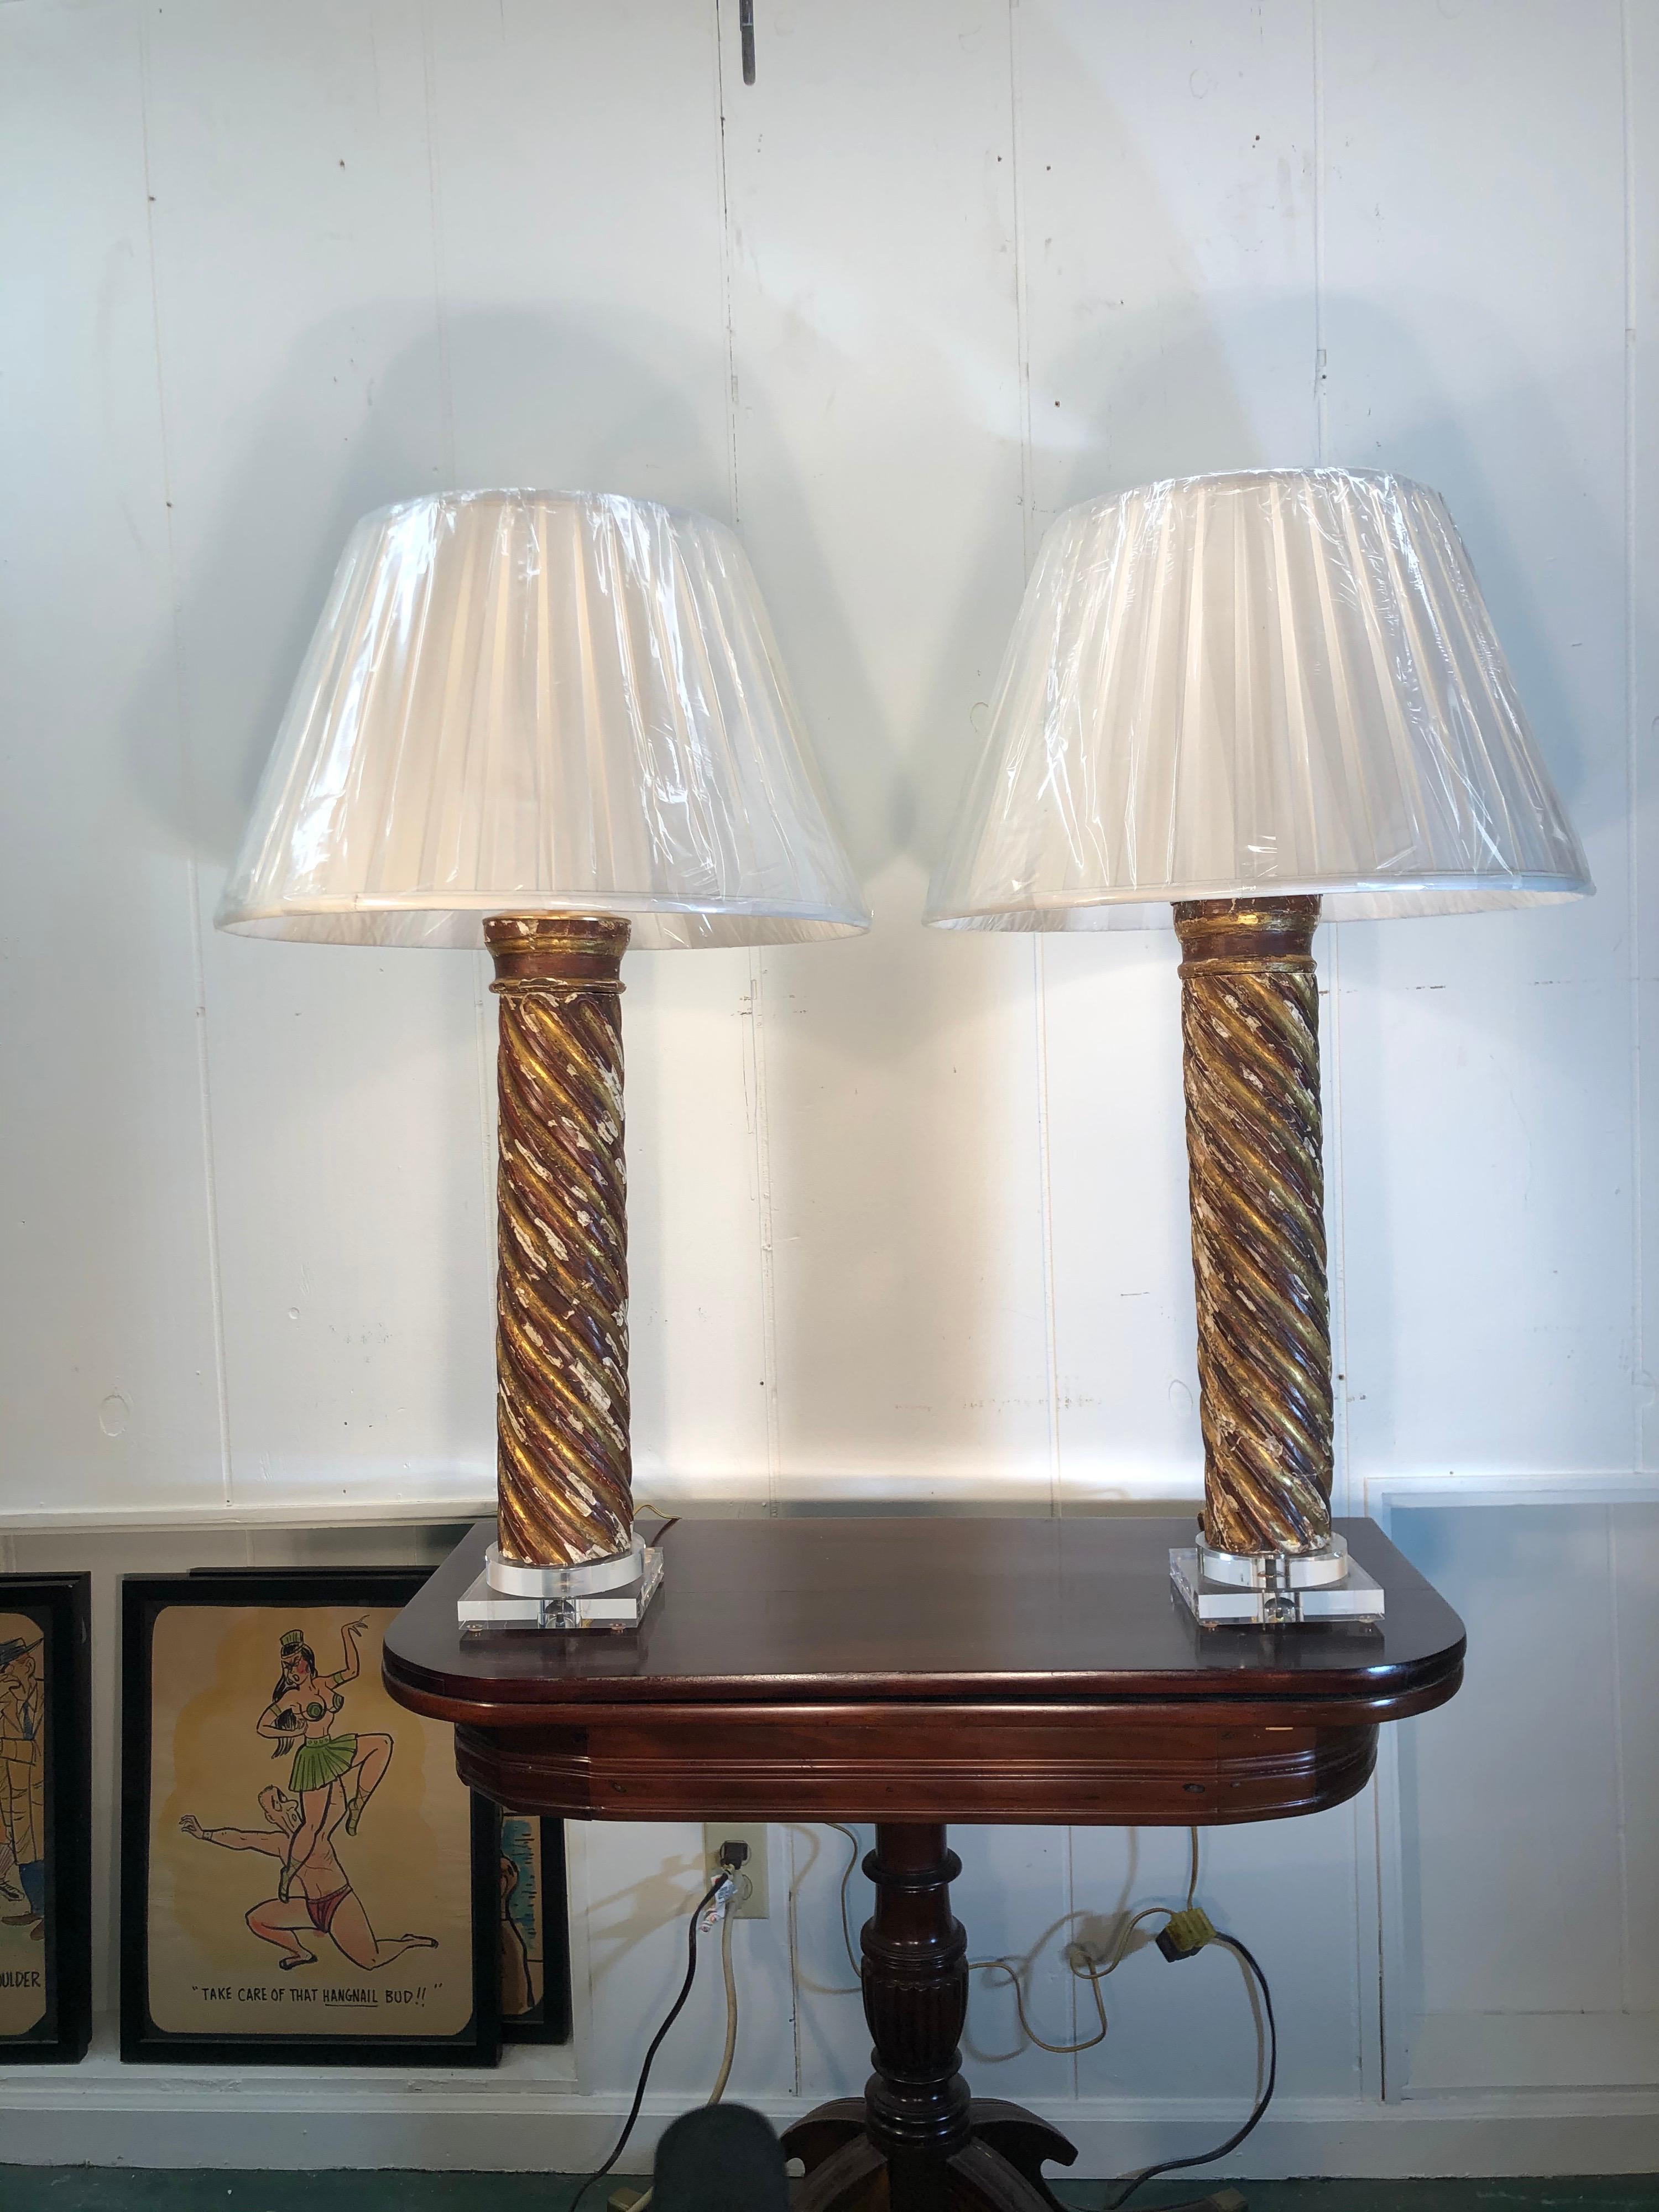 Pair of Mid-18th Century Italian Giltwood Column Lamps For Sale 6